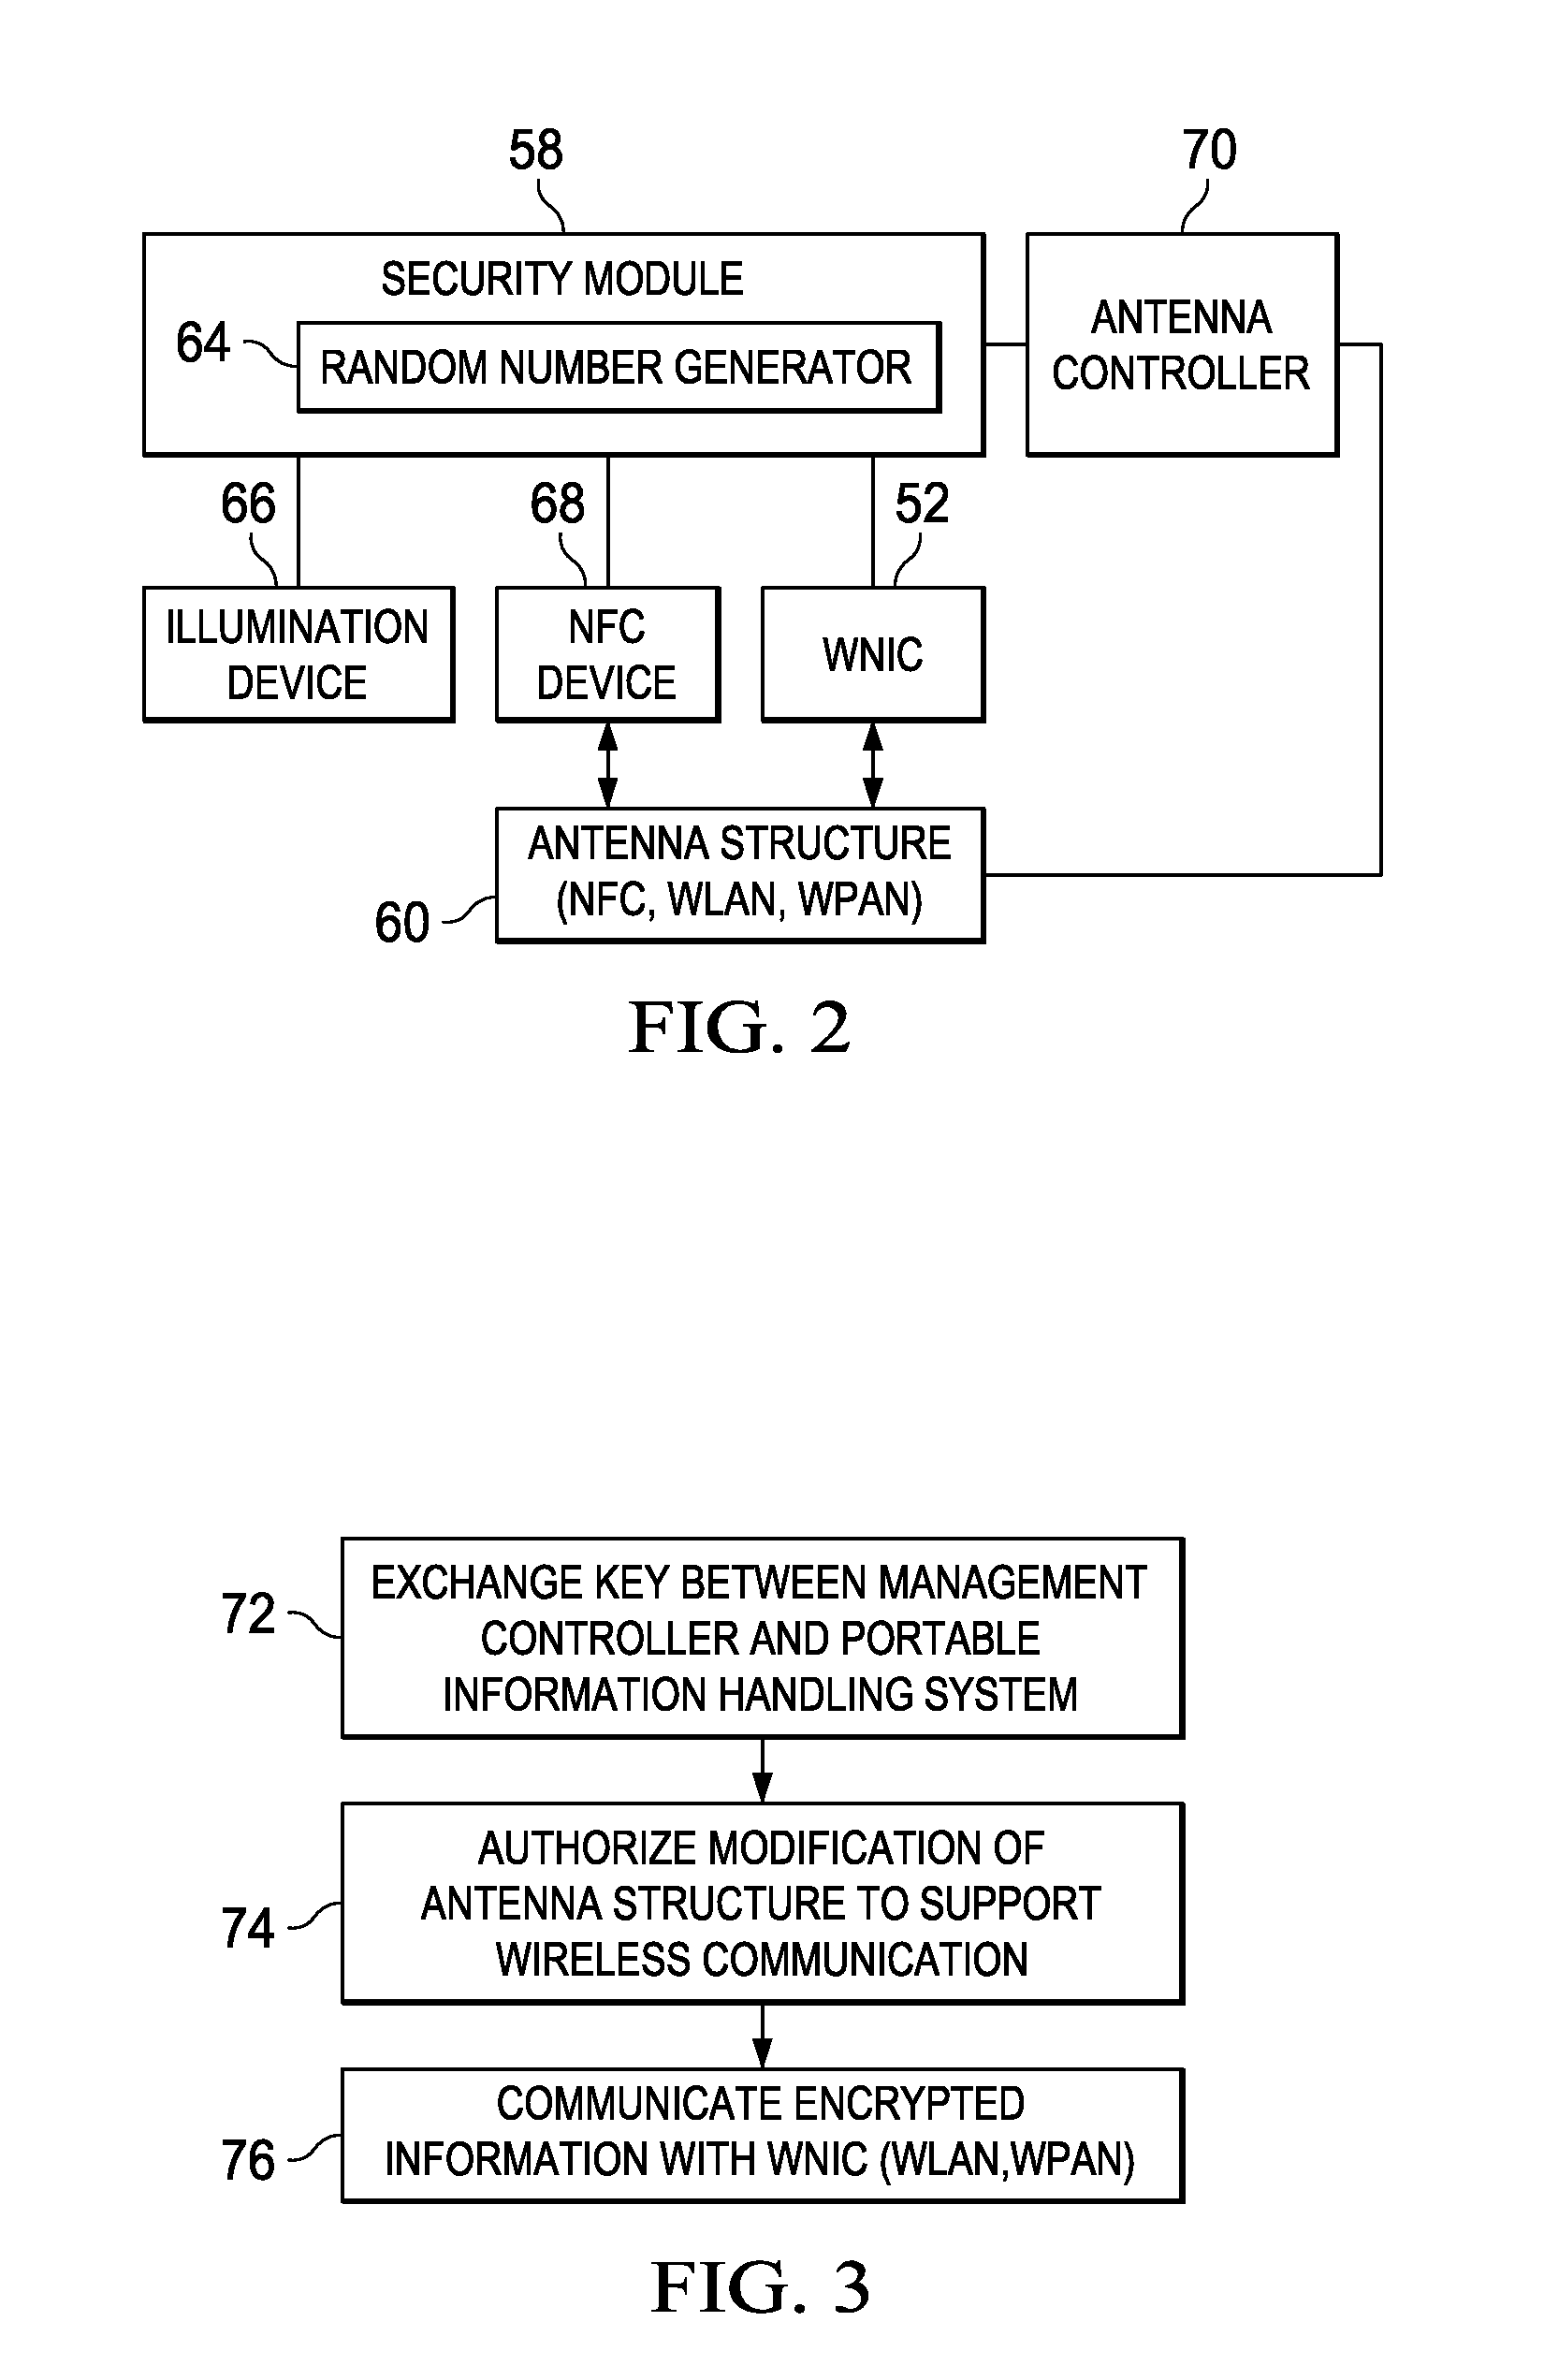 Information Handling System Secure RF Wireless Communication Management with Out-of-Band Encryption Information Handshake